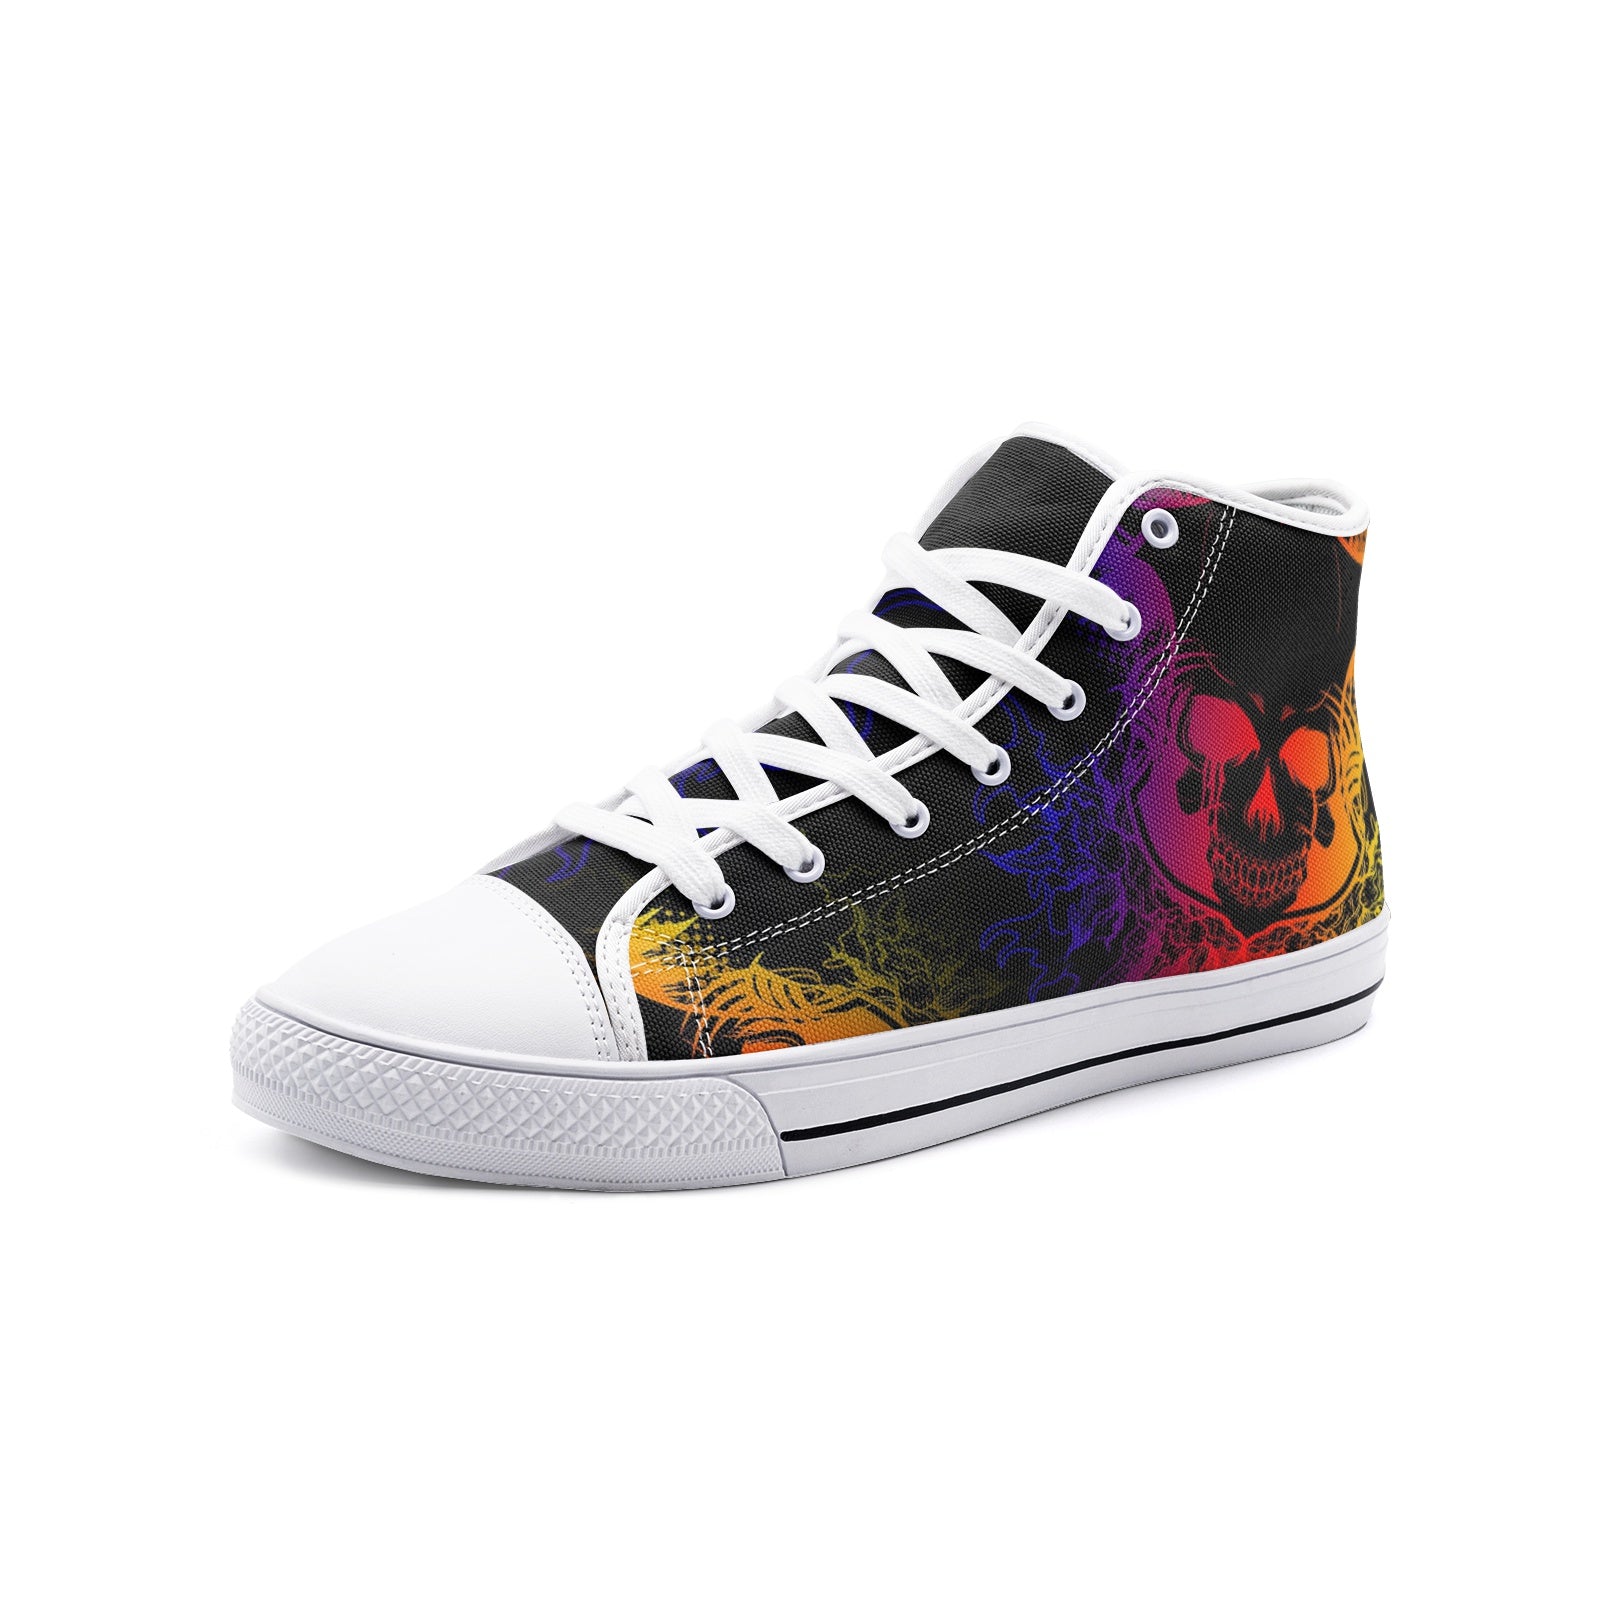 Ghost skull Unisex High Top Canvas Shoes